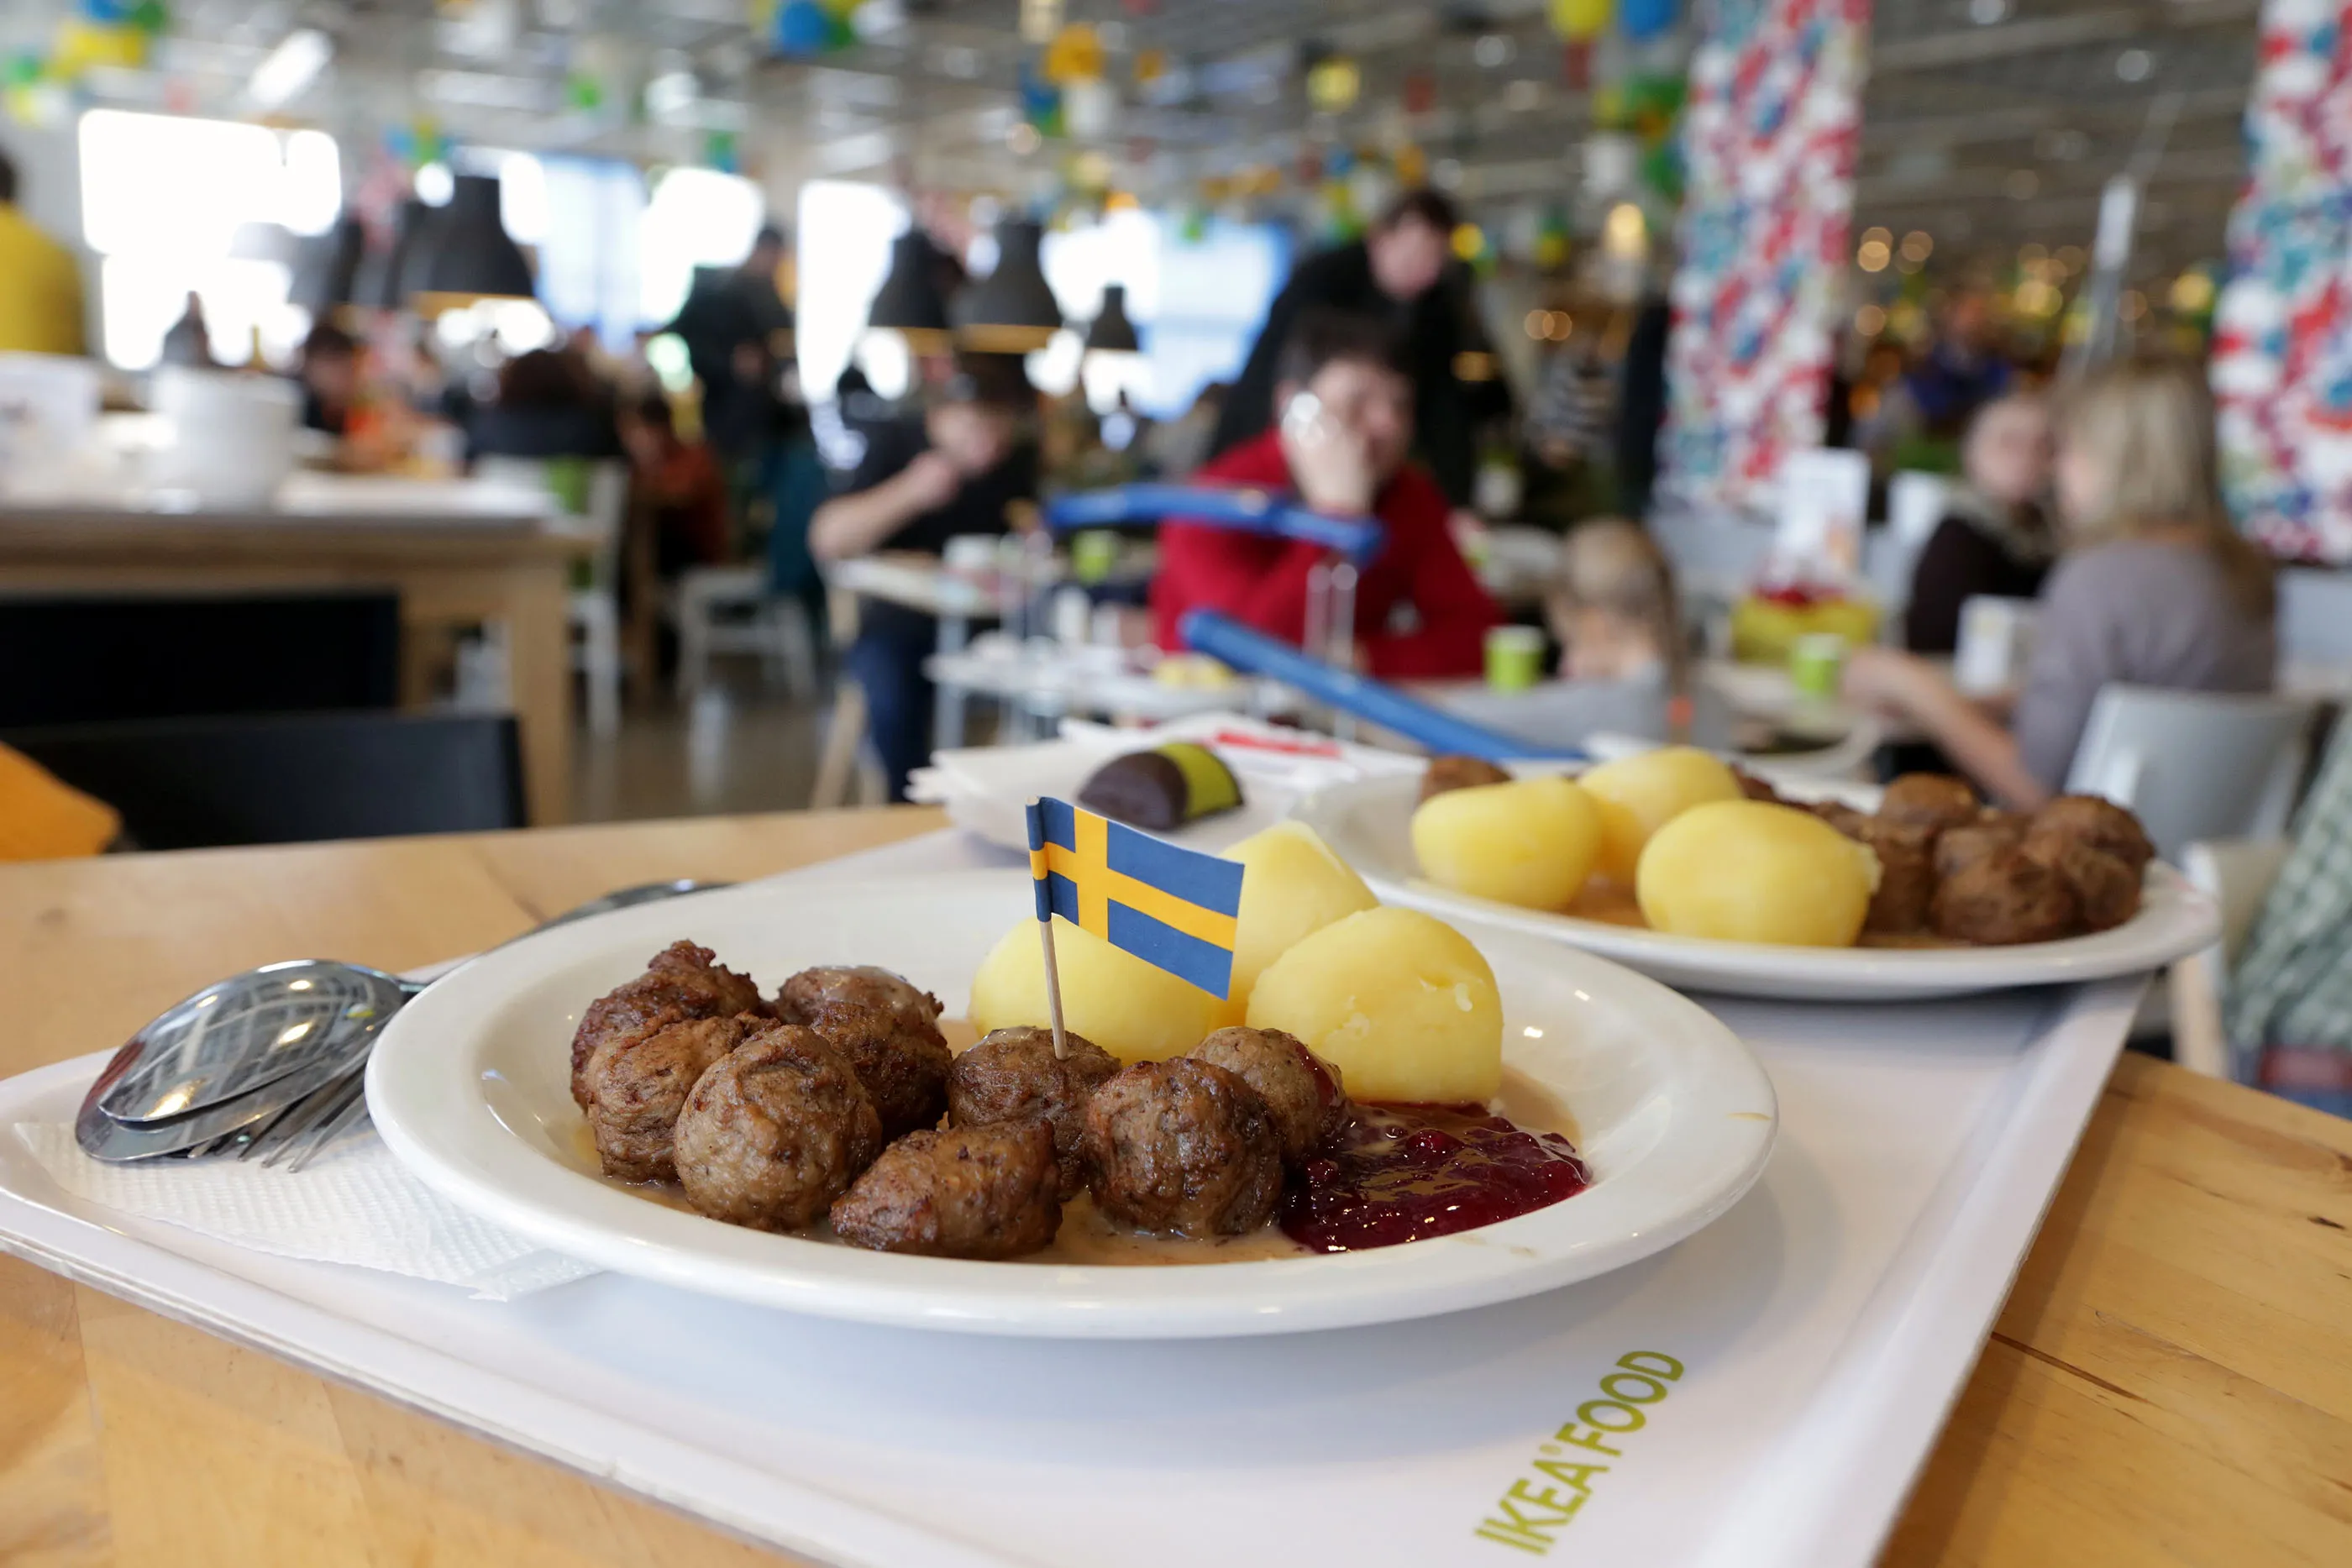 Ikea What the Best Deals Are at Its Restaurant Money